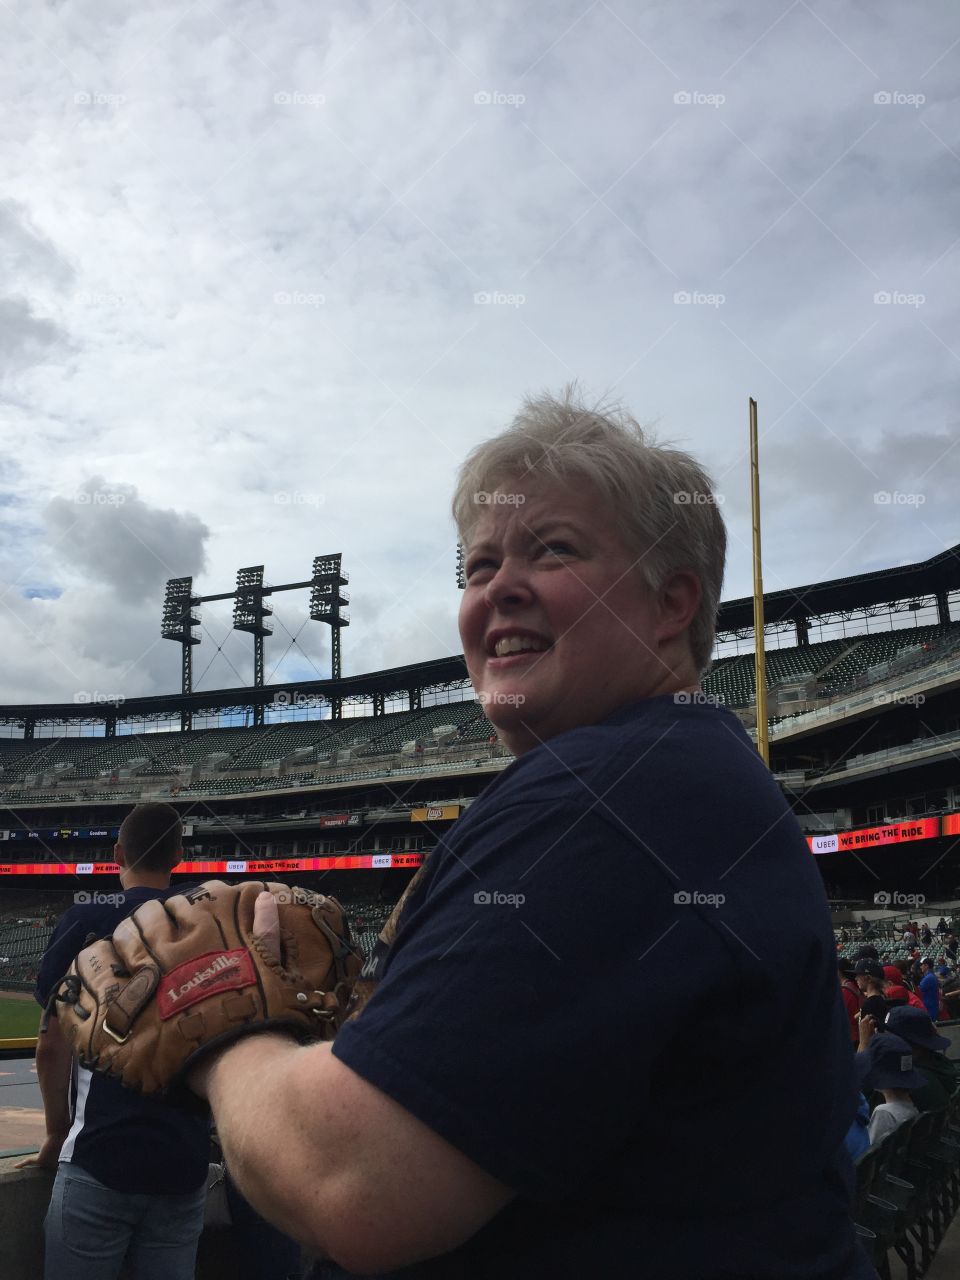 Ready for the long ball! Detroit Tigers Baseball!